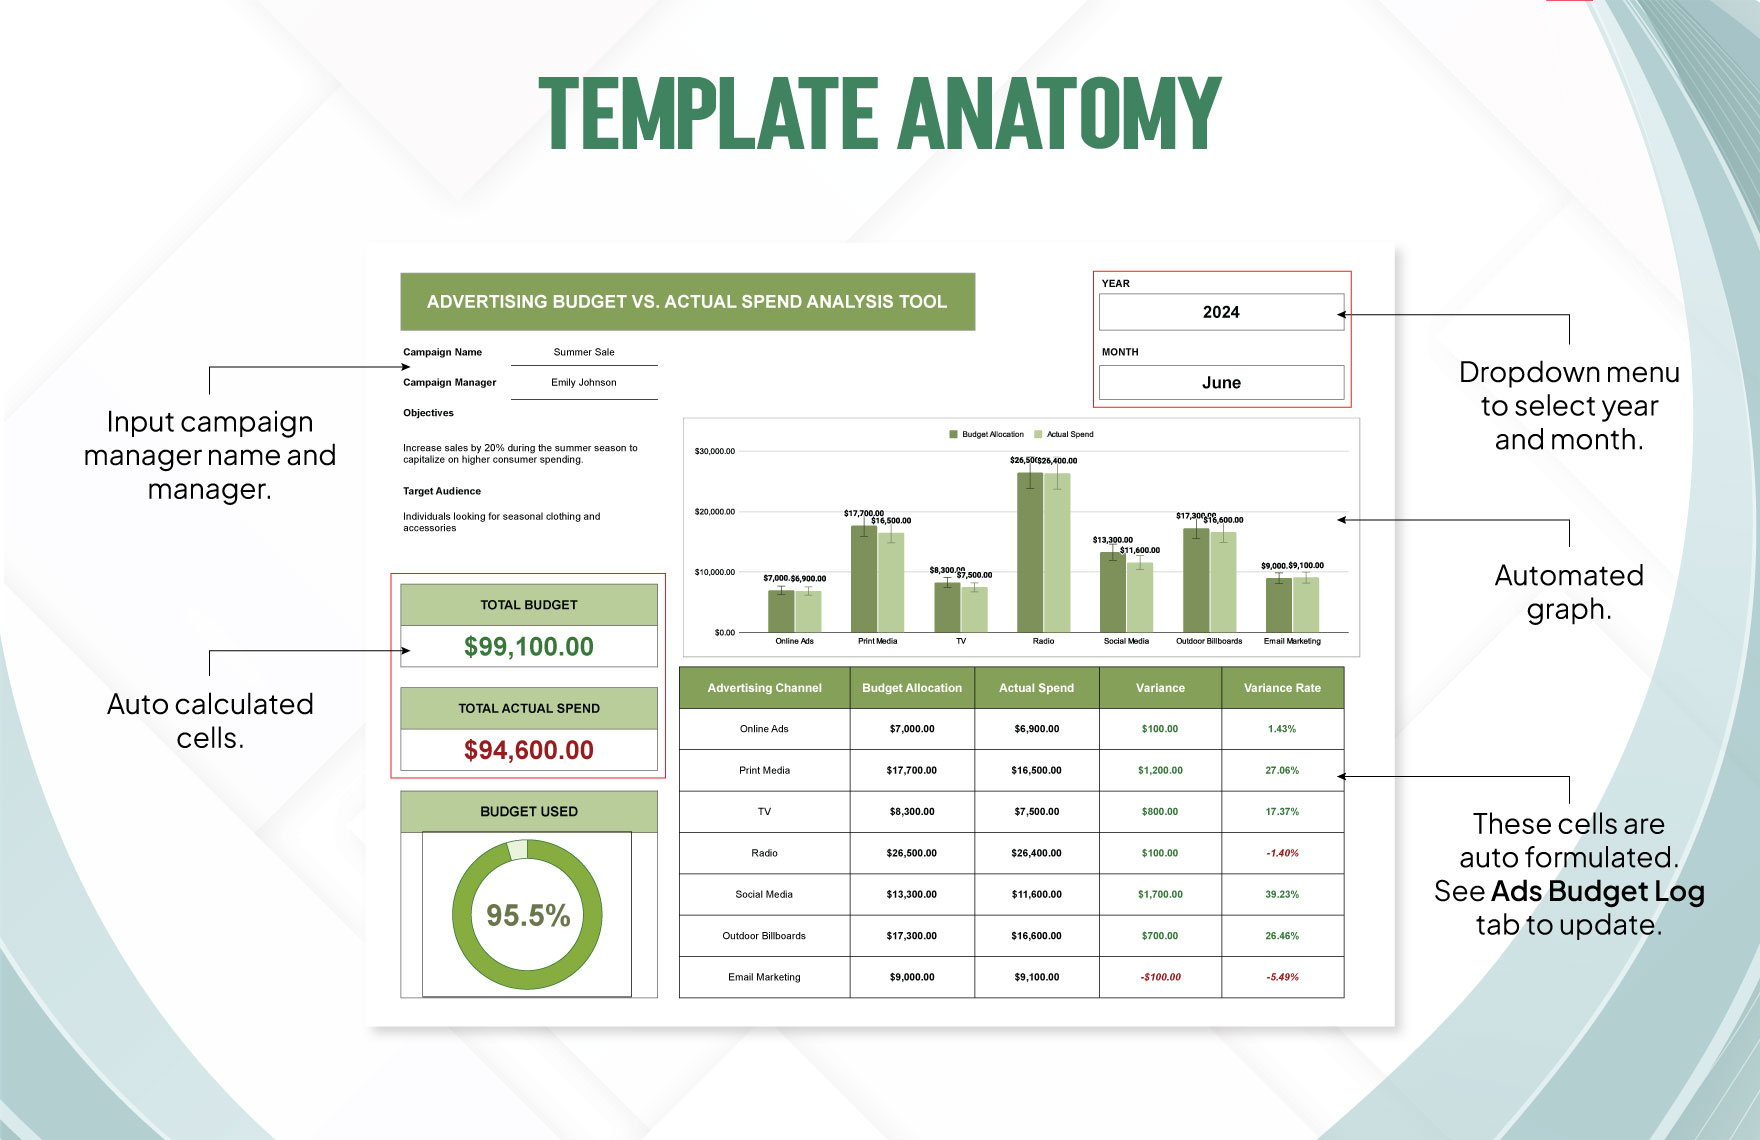 Advertising Budget vs. Actual Spend Analysis Tool Template